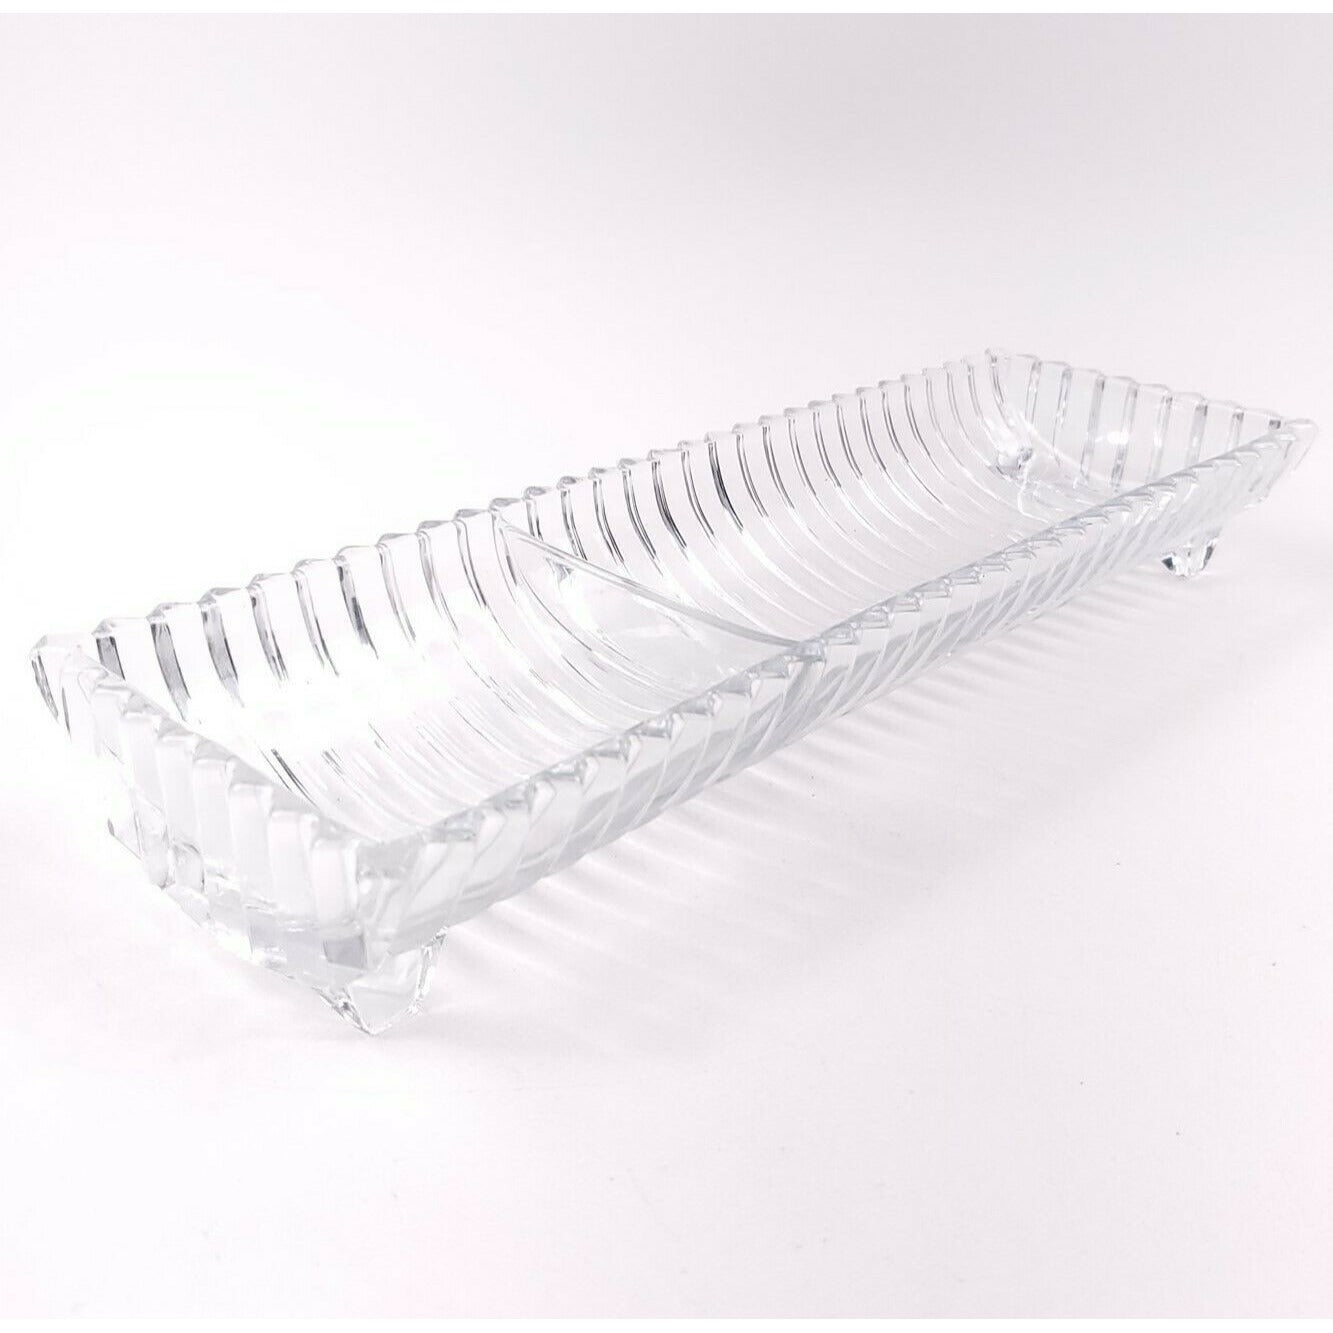 Heisey Vintage Glass Relish Celery Dish Serving Tray Rectangular Ribbed Cut